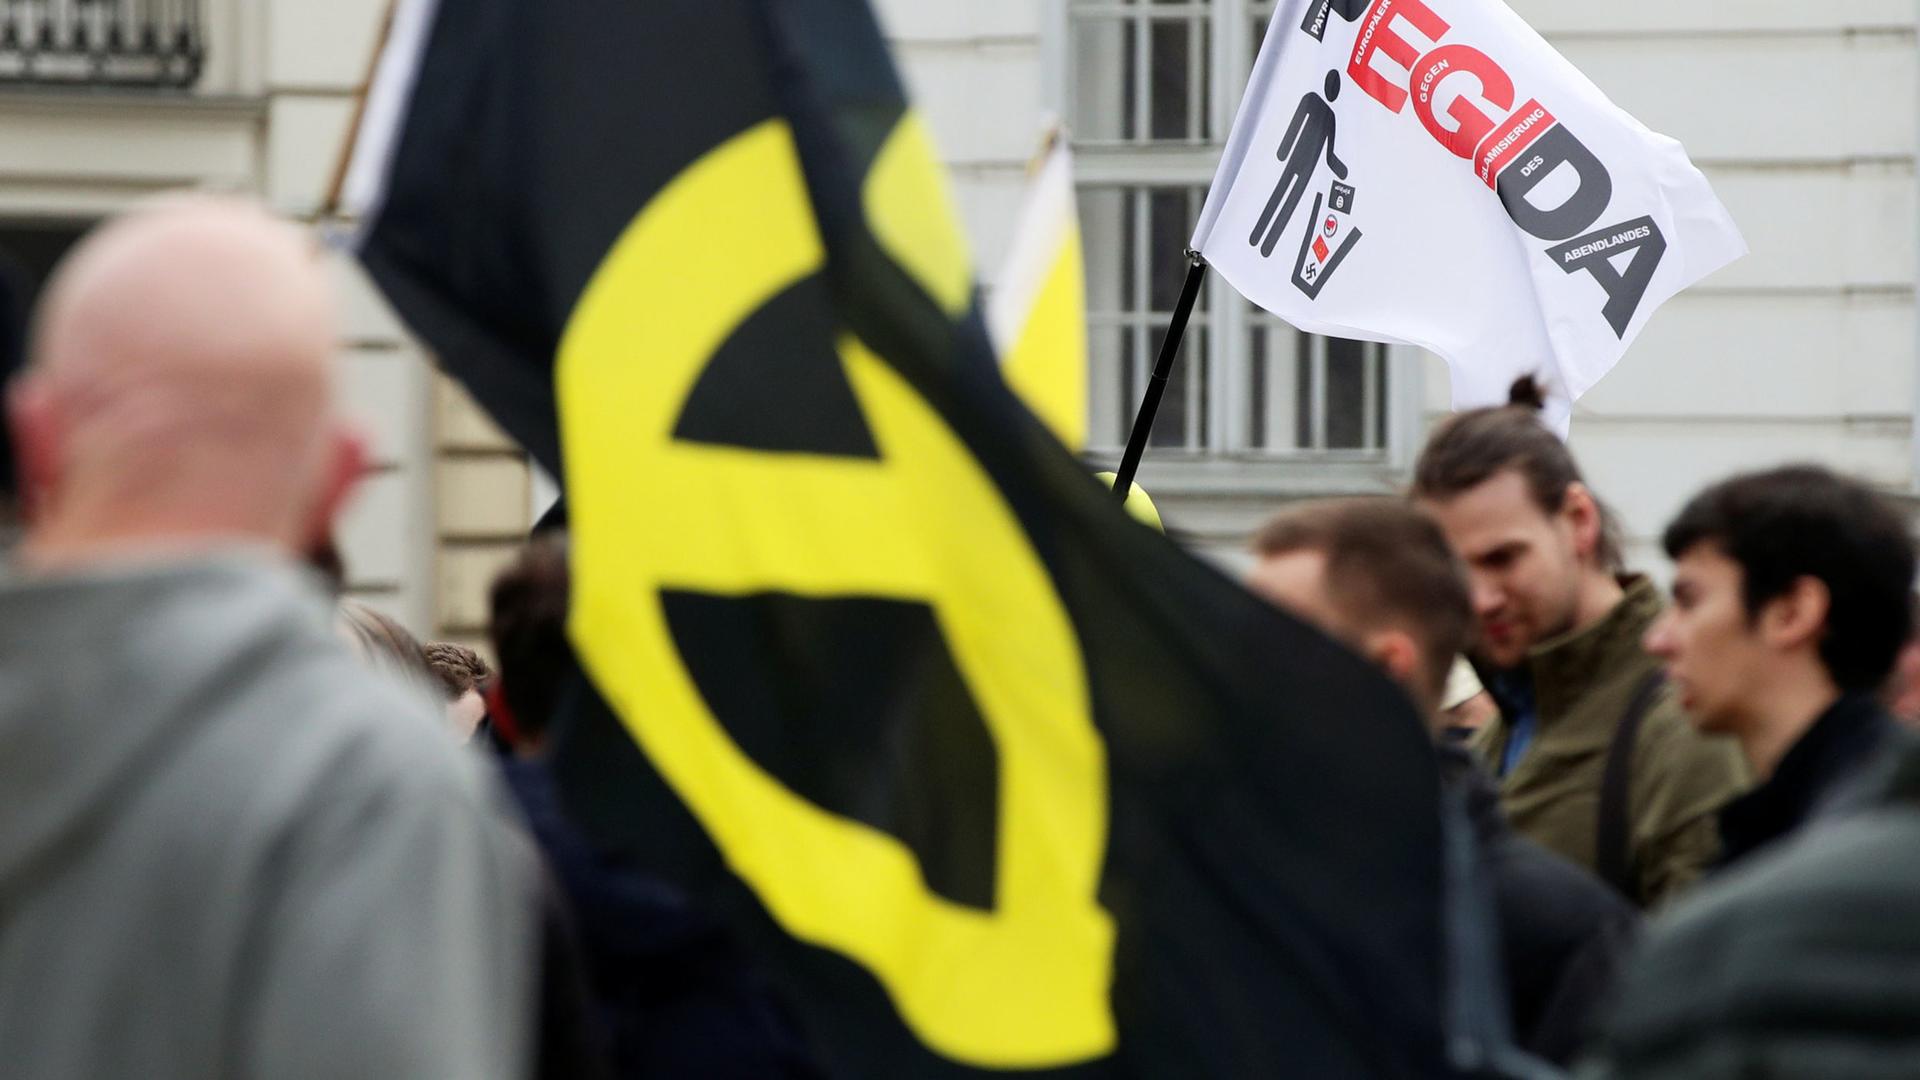 "With Trump, the pride of a whole population has awoken," said the leader of Austria’s Identitarian Party, Martin Sellner, seen at an April 2019 protest where an anti-Islam yellow flag is displayed.